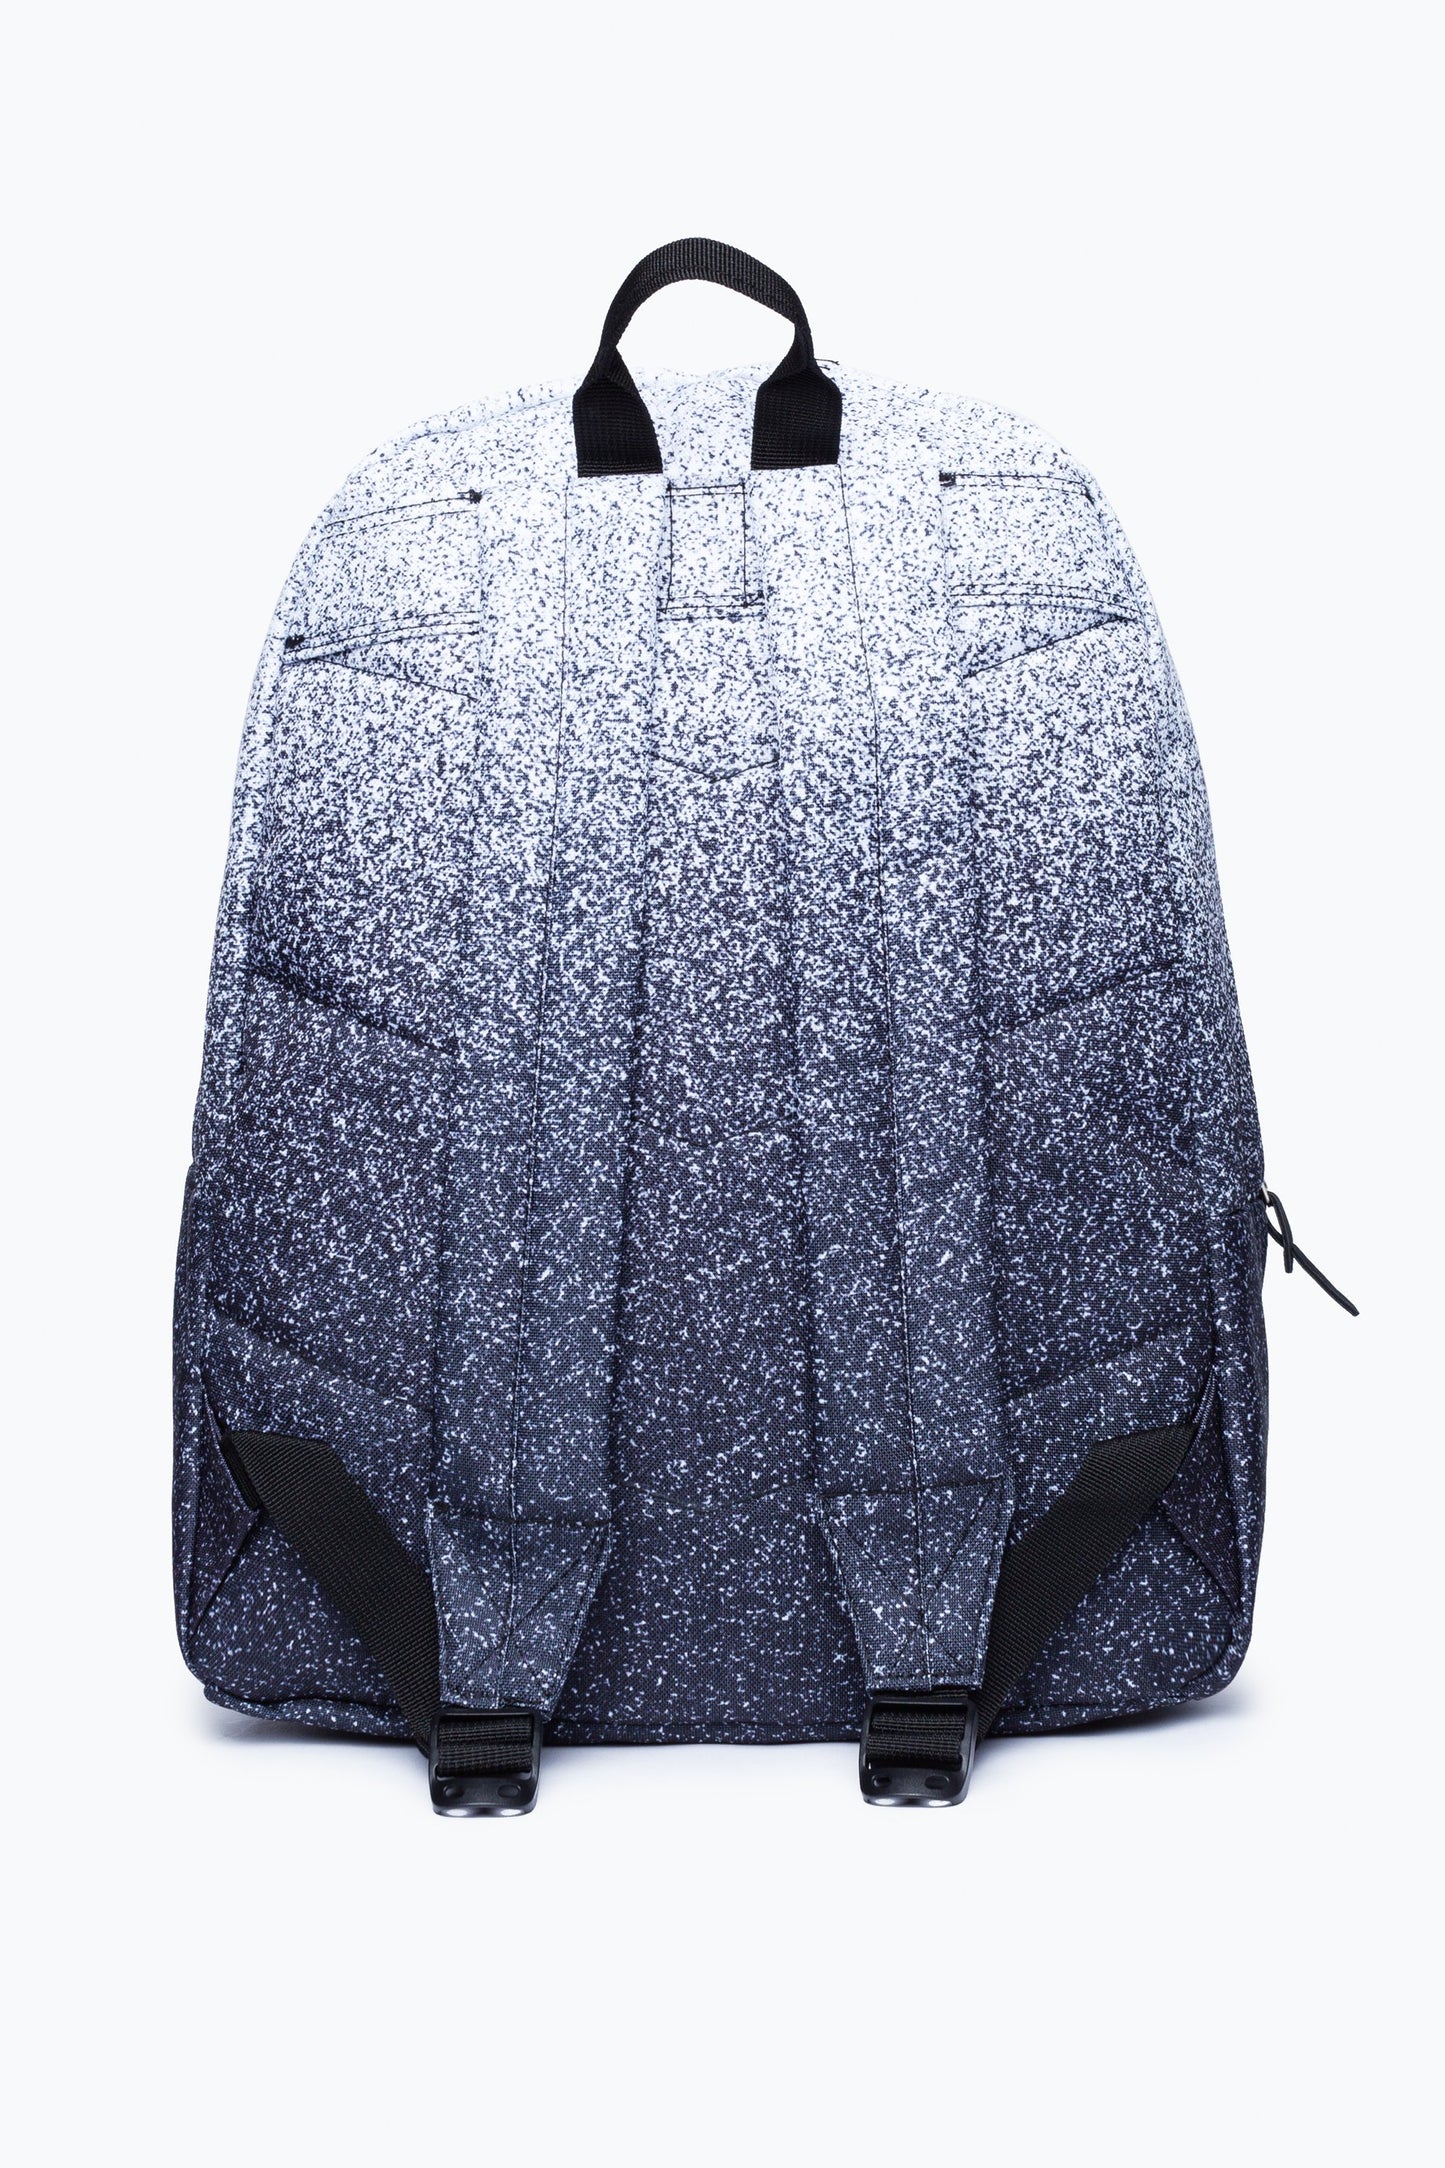 Hype Black Speckle Fade Backpack